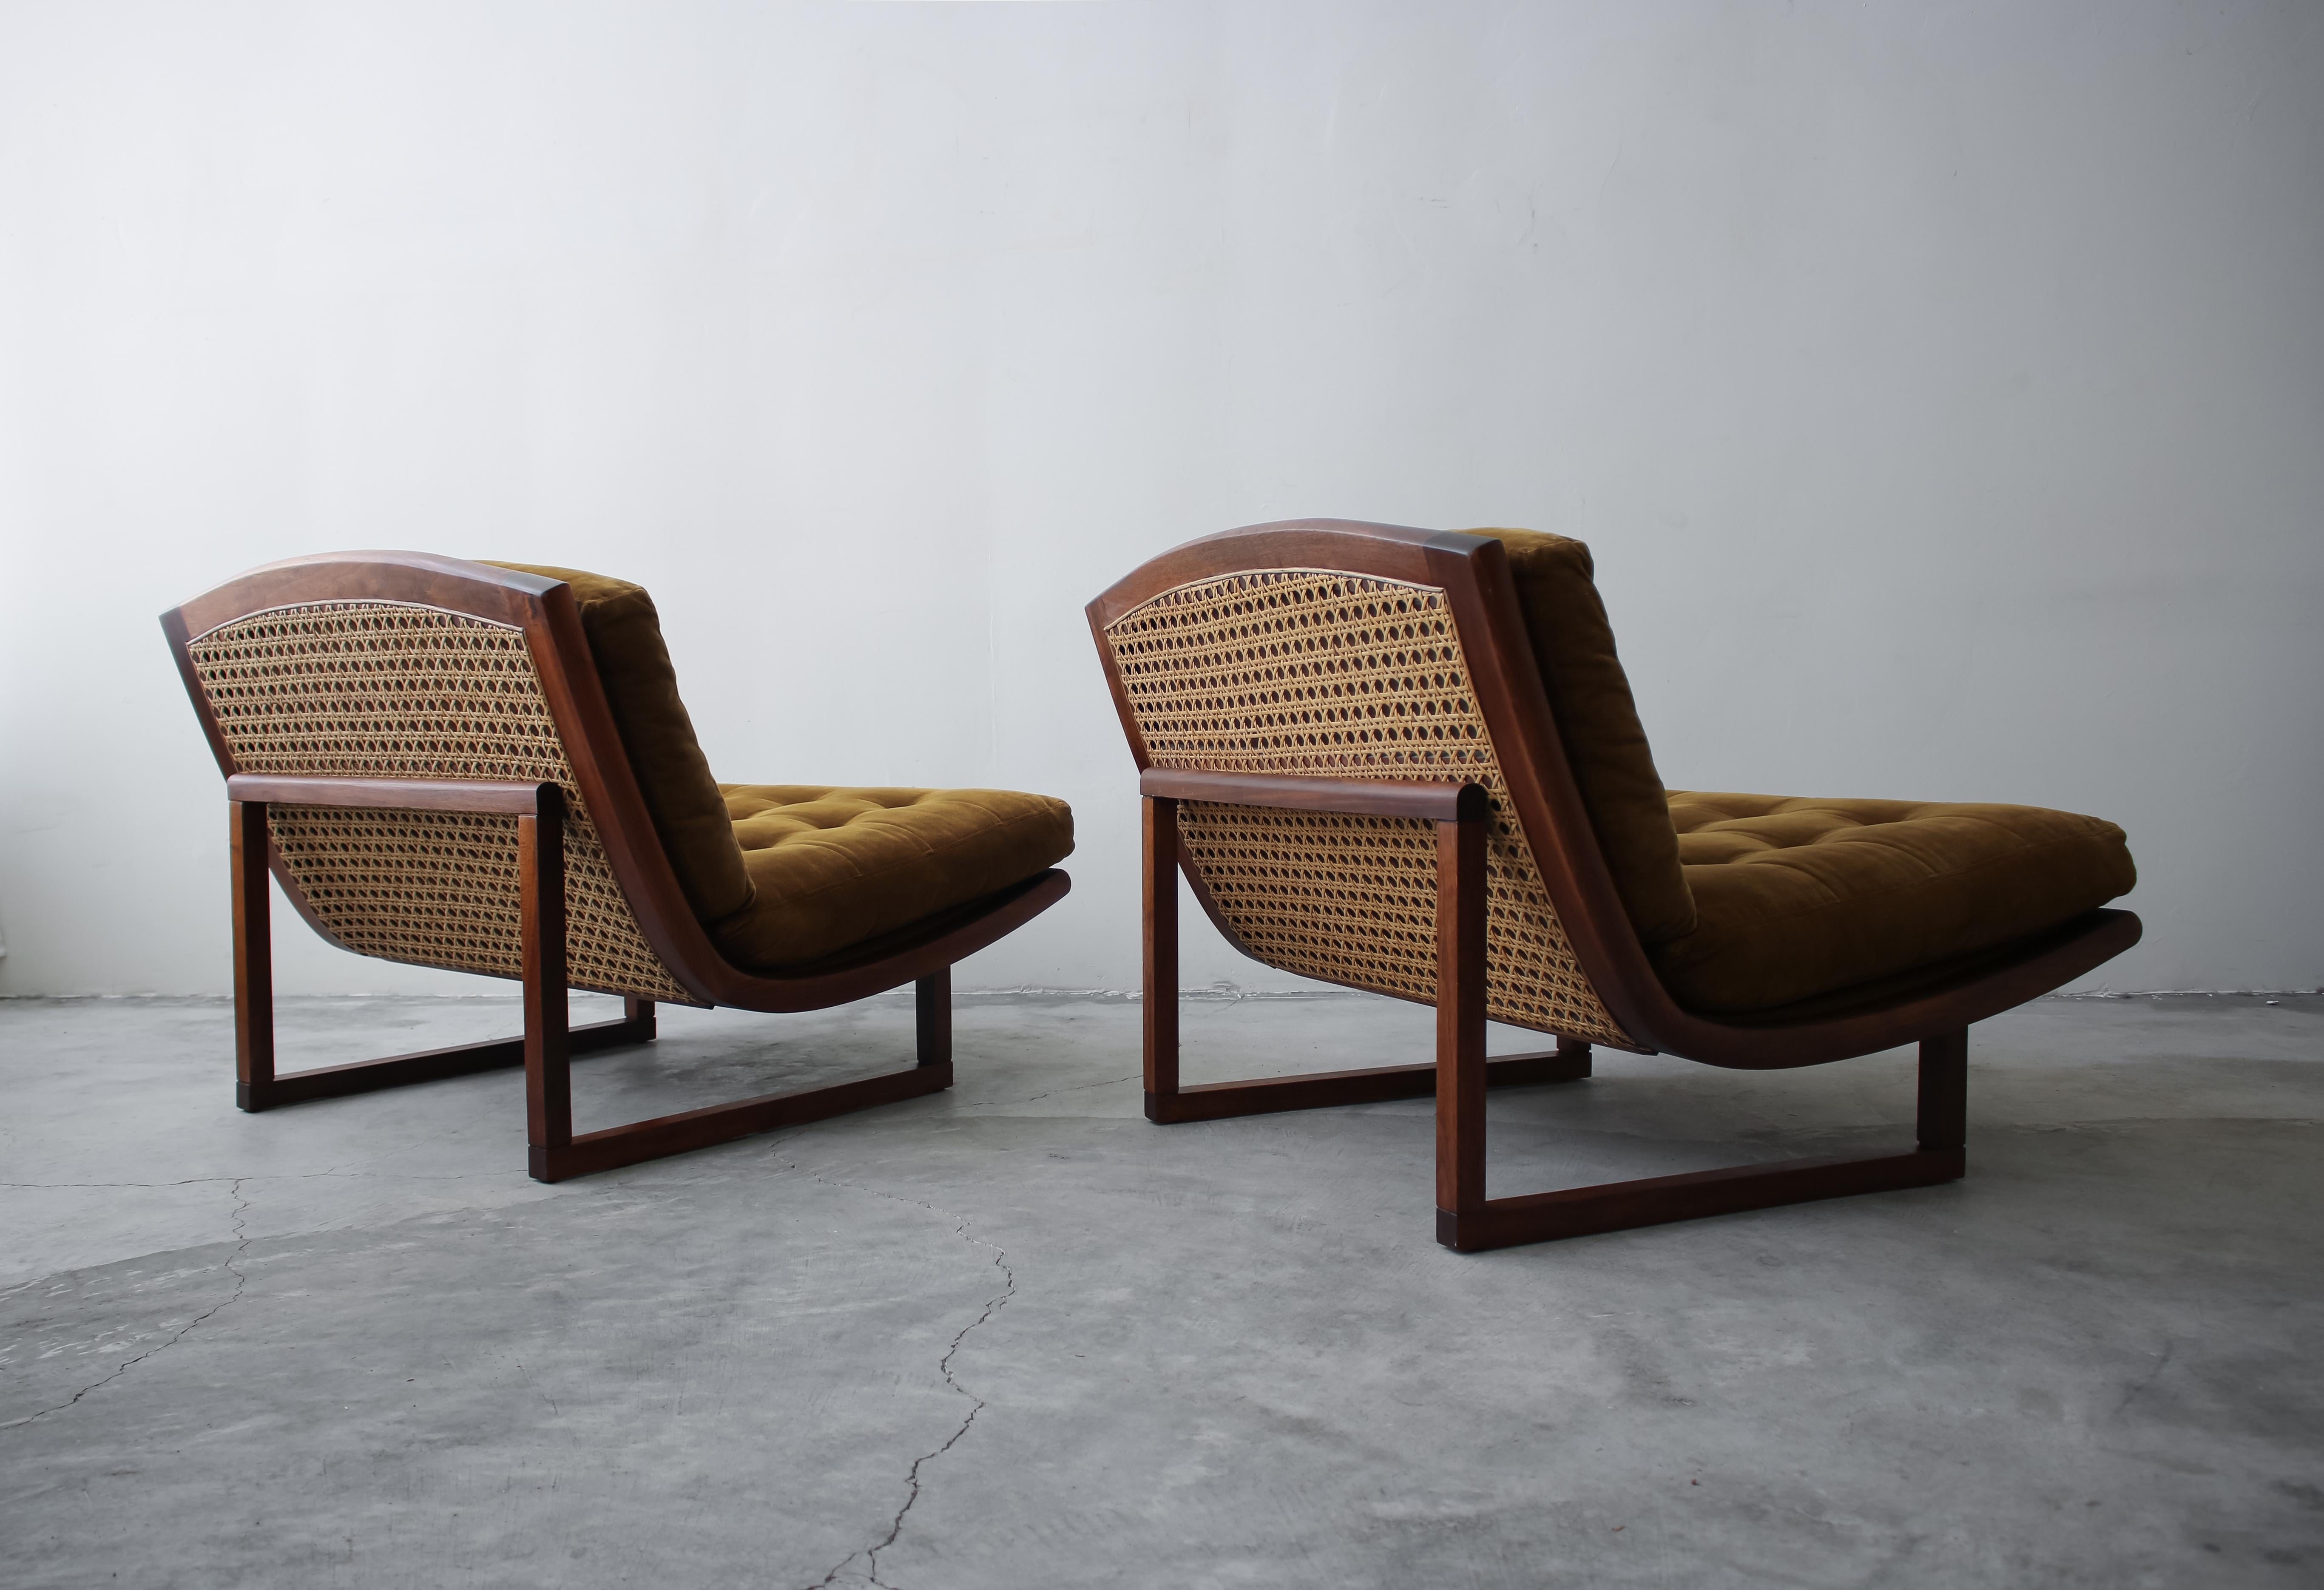 If you're looking for an extremely rare and unique pair of midcentury lounge chairs, with the most amazing details and lines, look no further. These chairs are absolutely stunning from EVERY Angle. A gorgeous walnut and cane scoop sits on solid